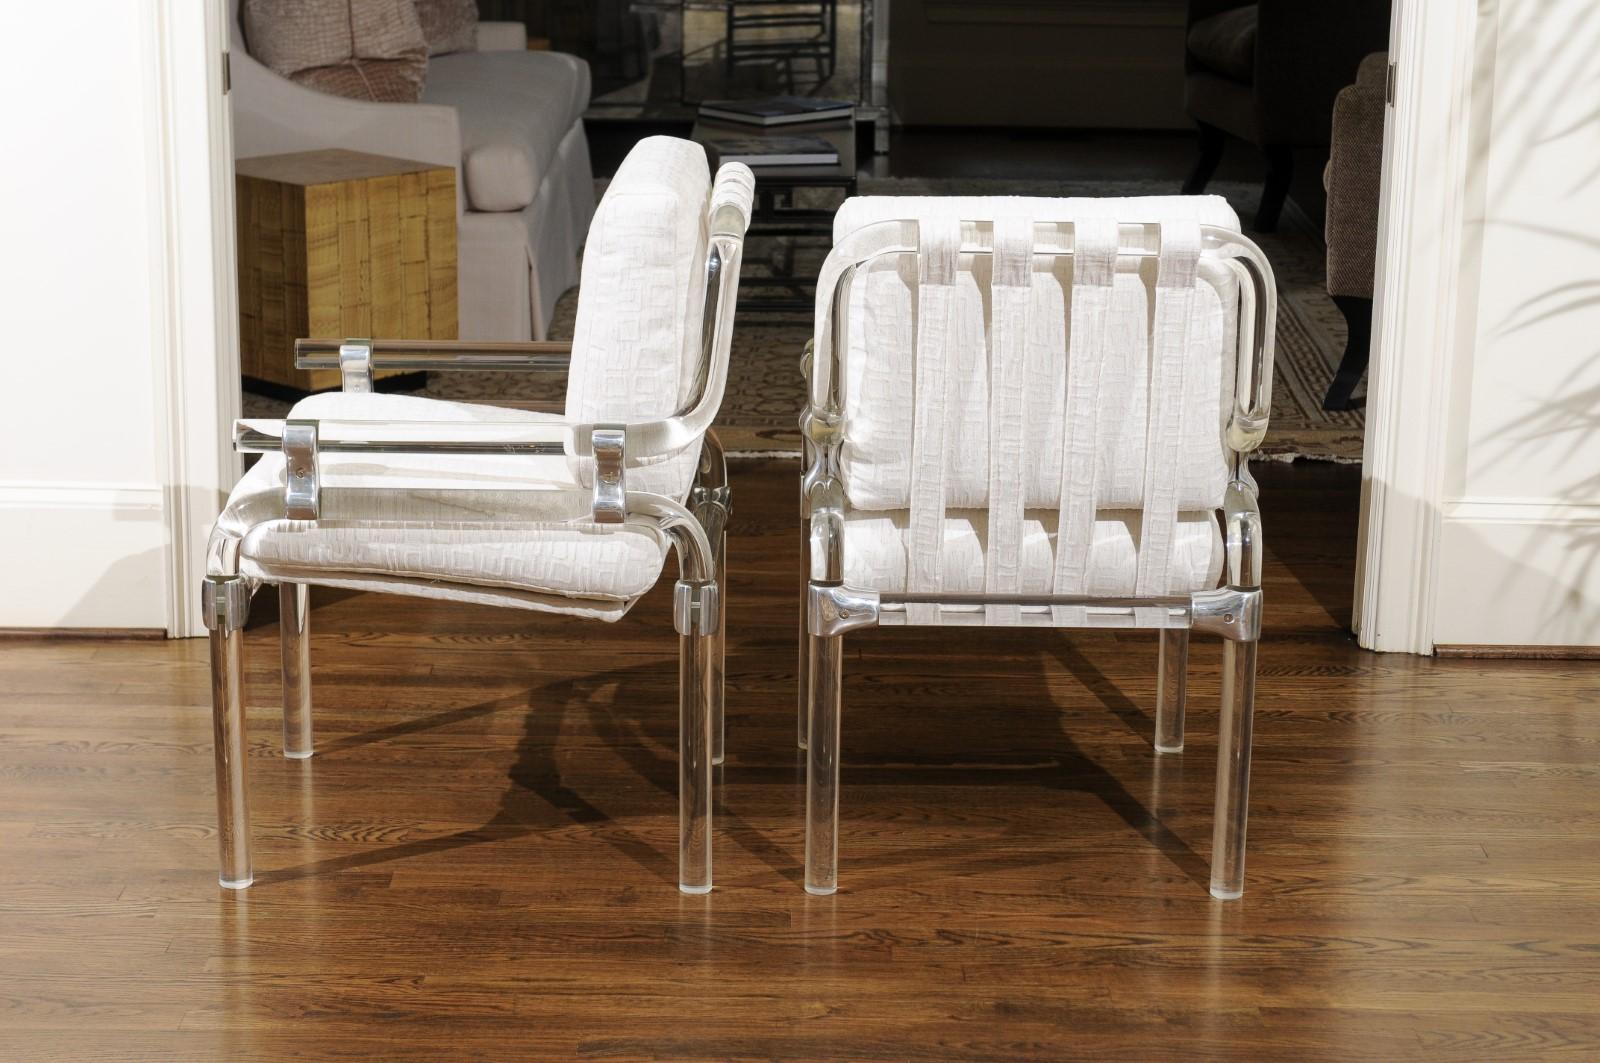 Staggering Set of 8 Lucite Arm Dining Chairs by Jeff Messerschmidt, 1985 For Sale 3